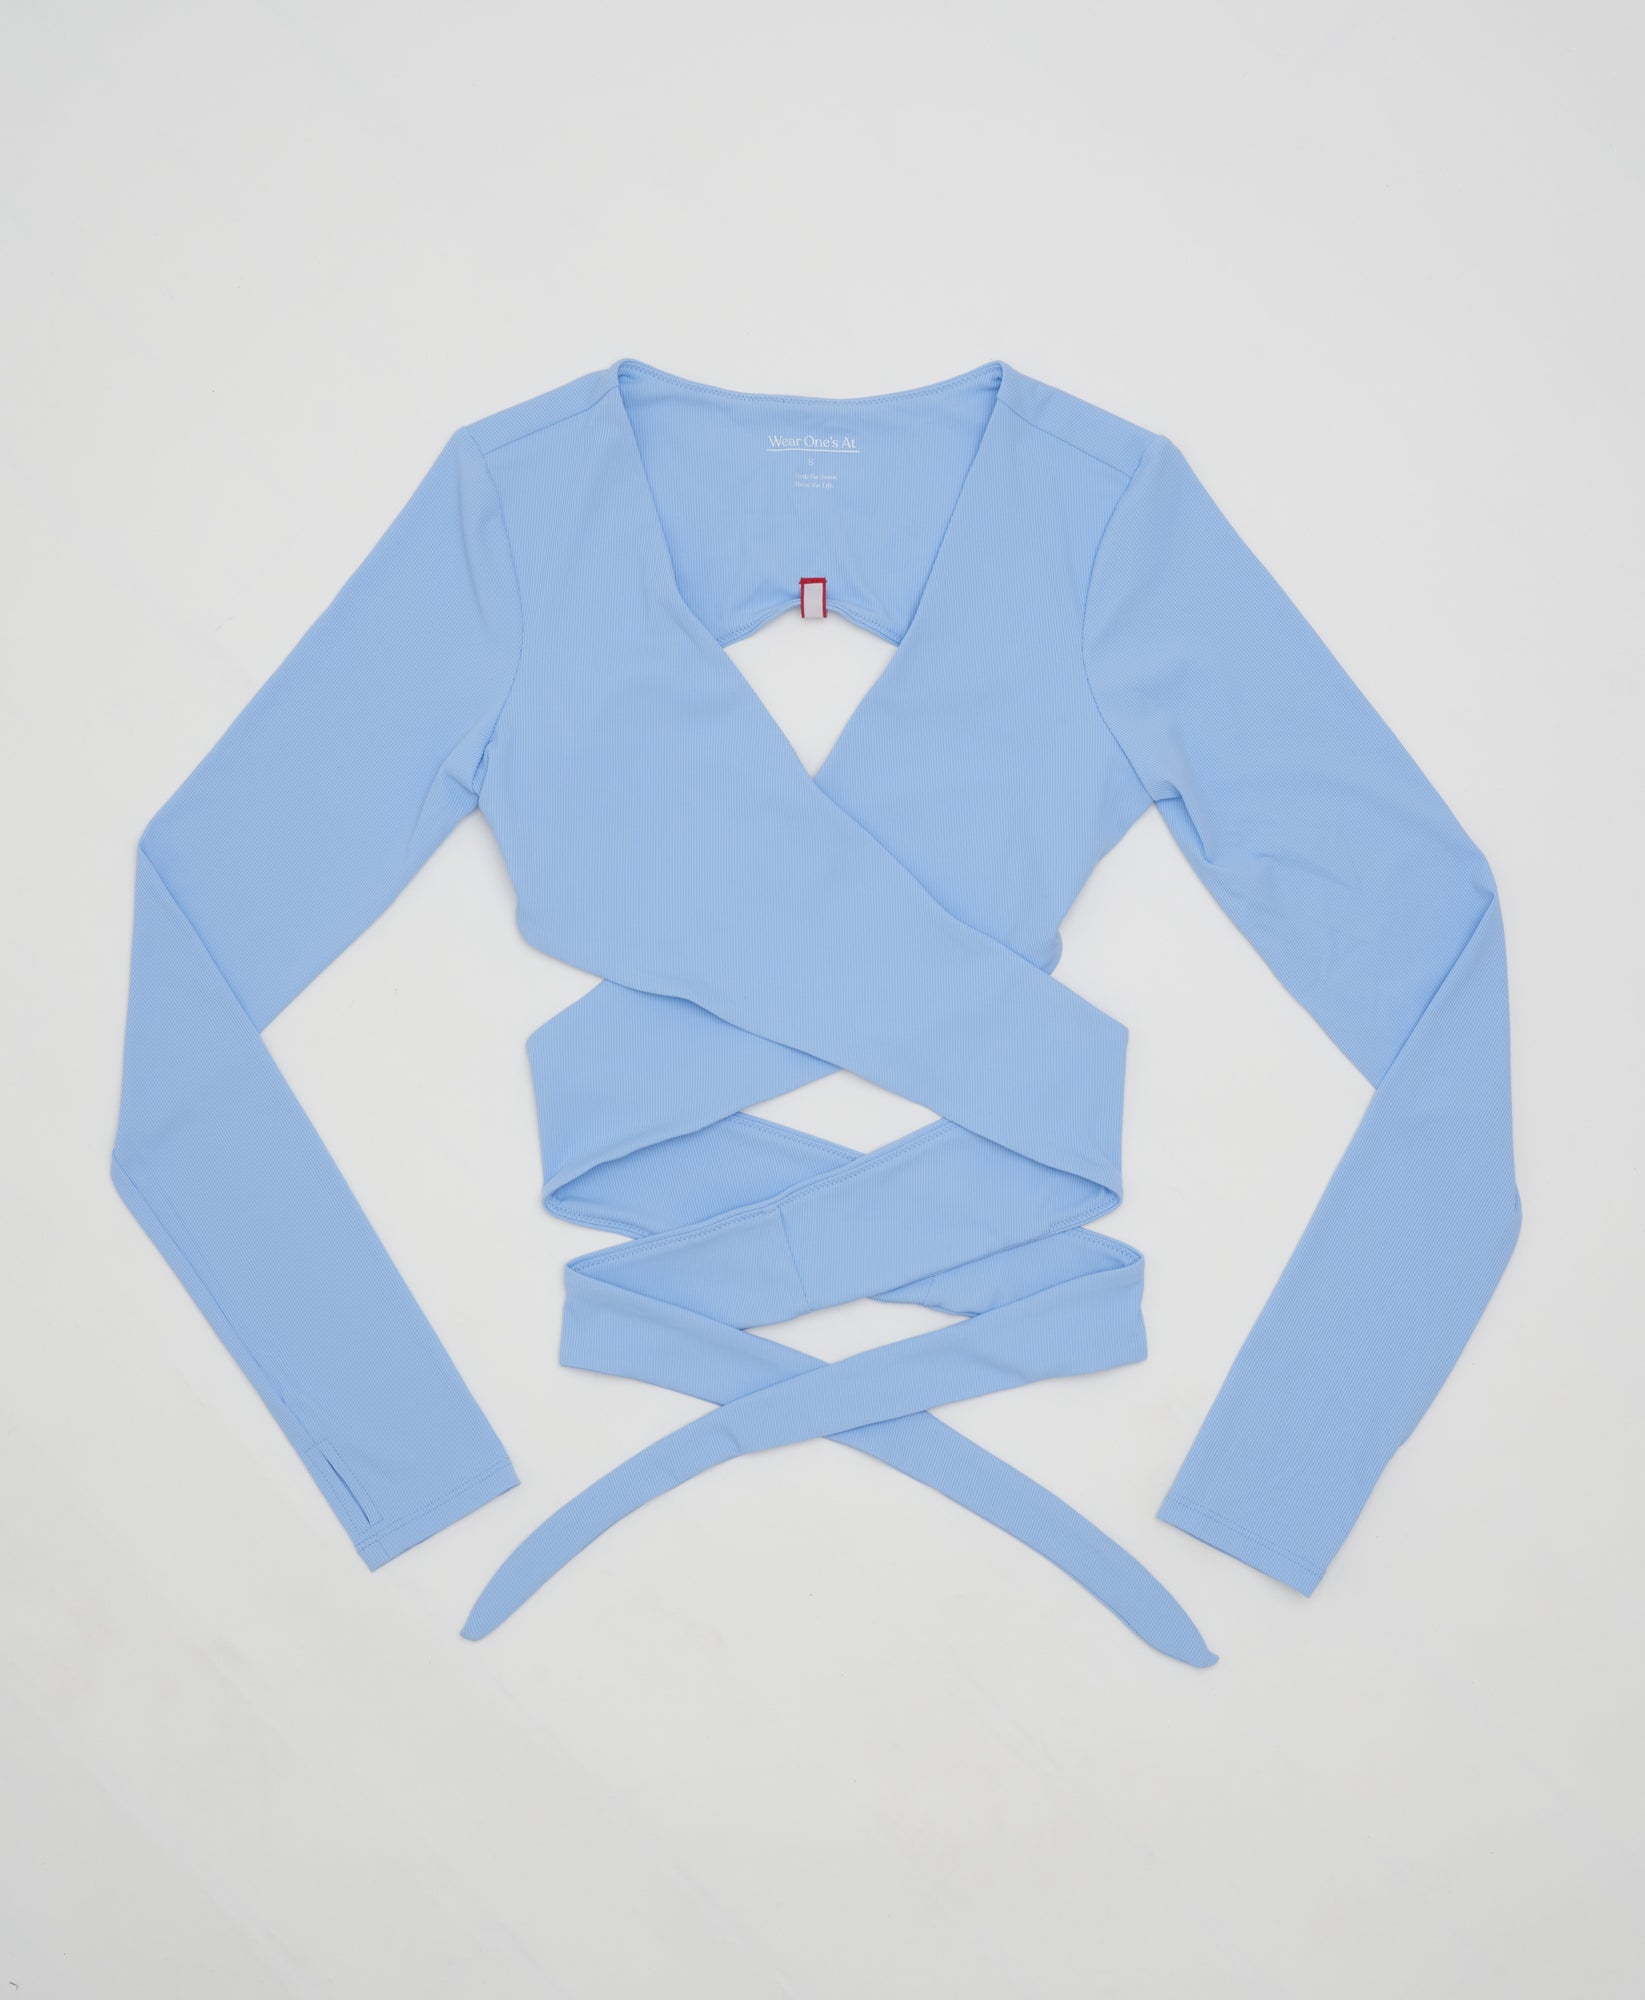 Wear One's At All Wrapped Up Top in Light Blue Flat Front